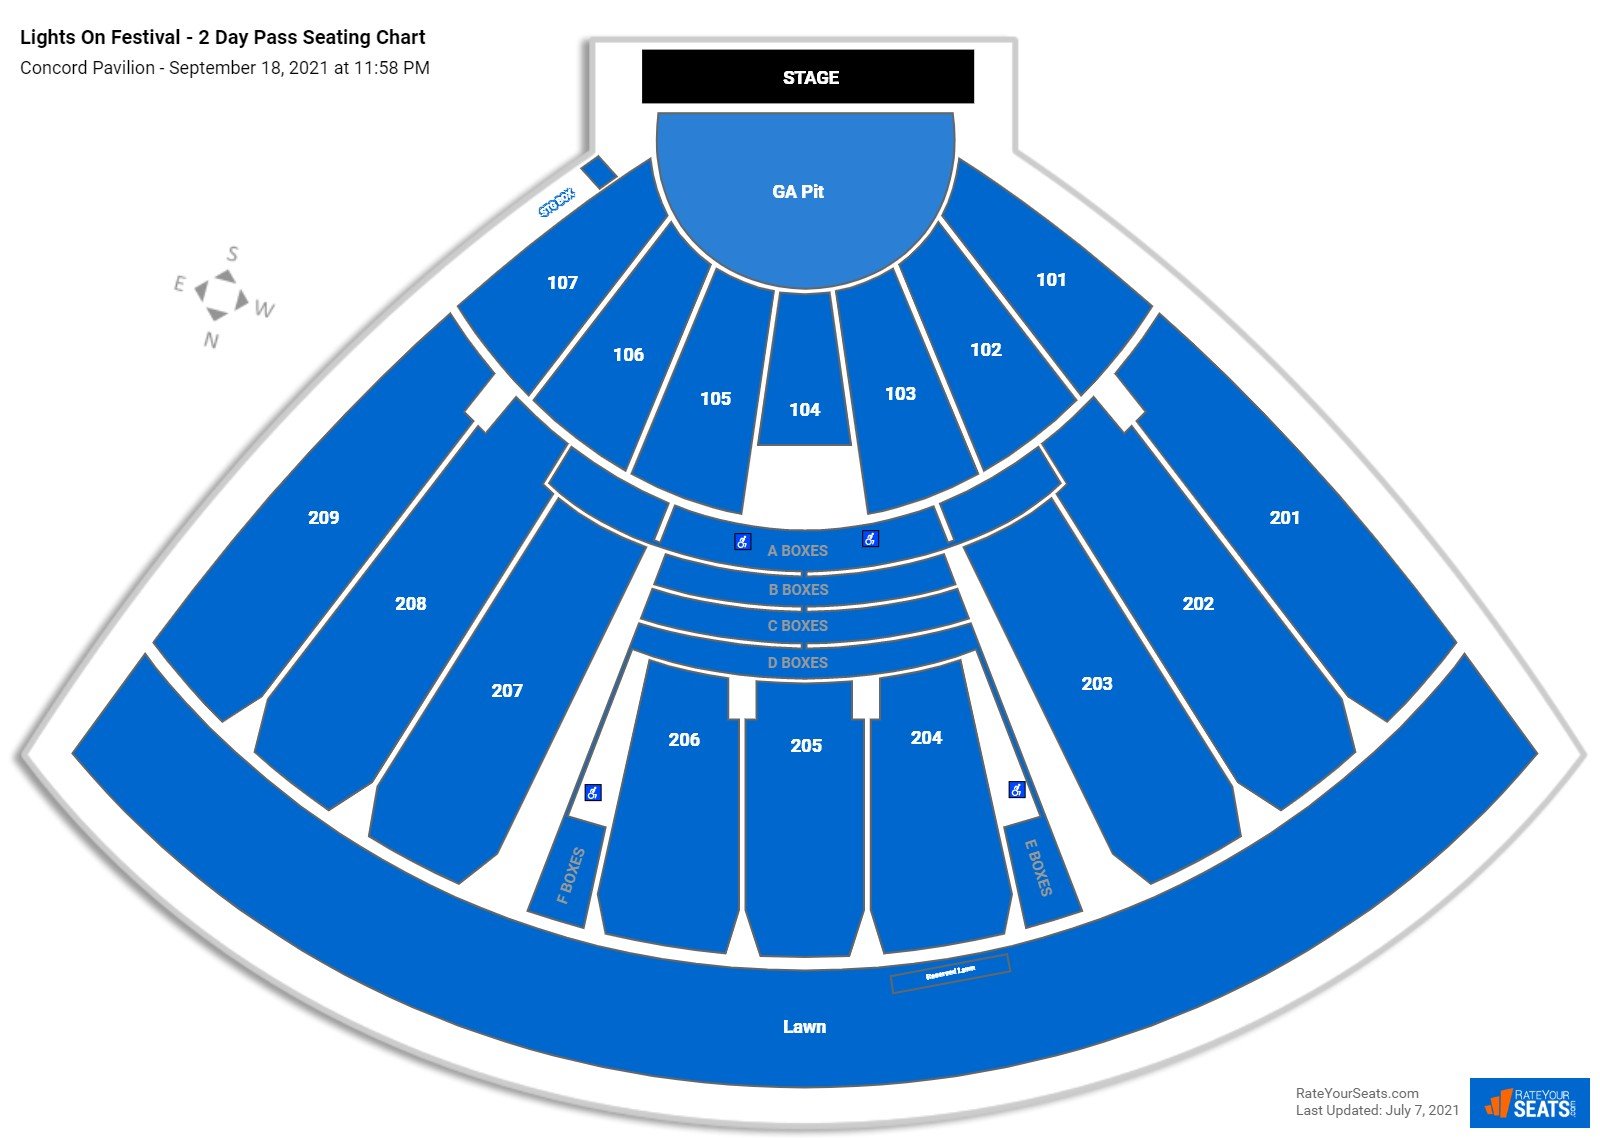 Concord Pavilion Seating Chart - RateYourSeats.com